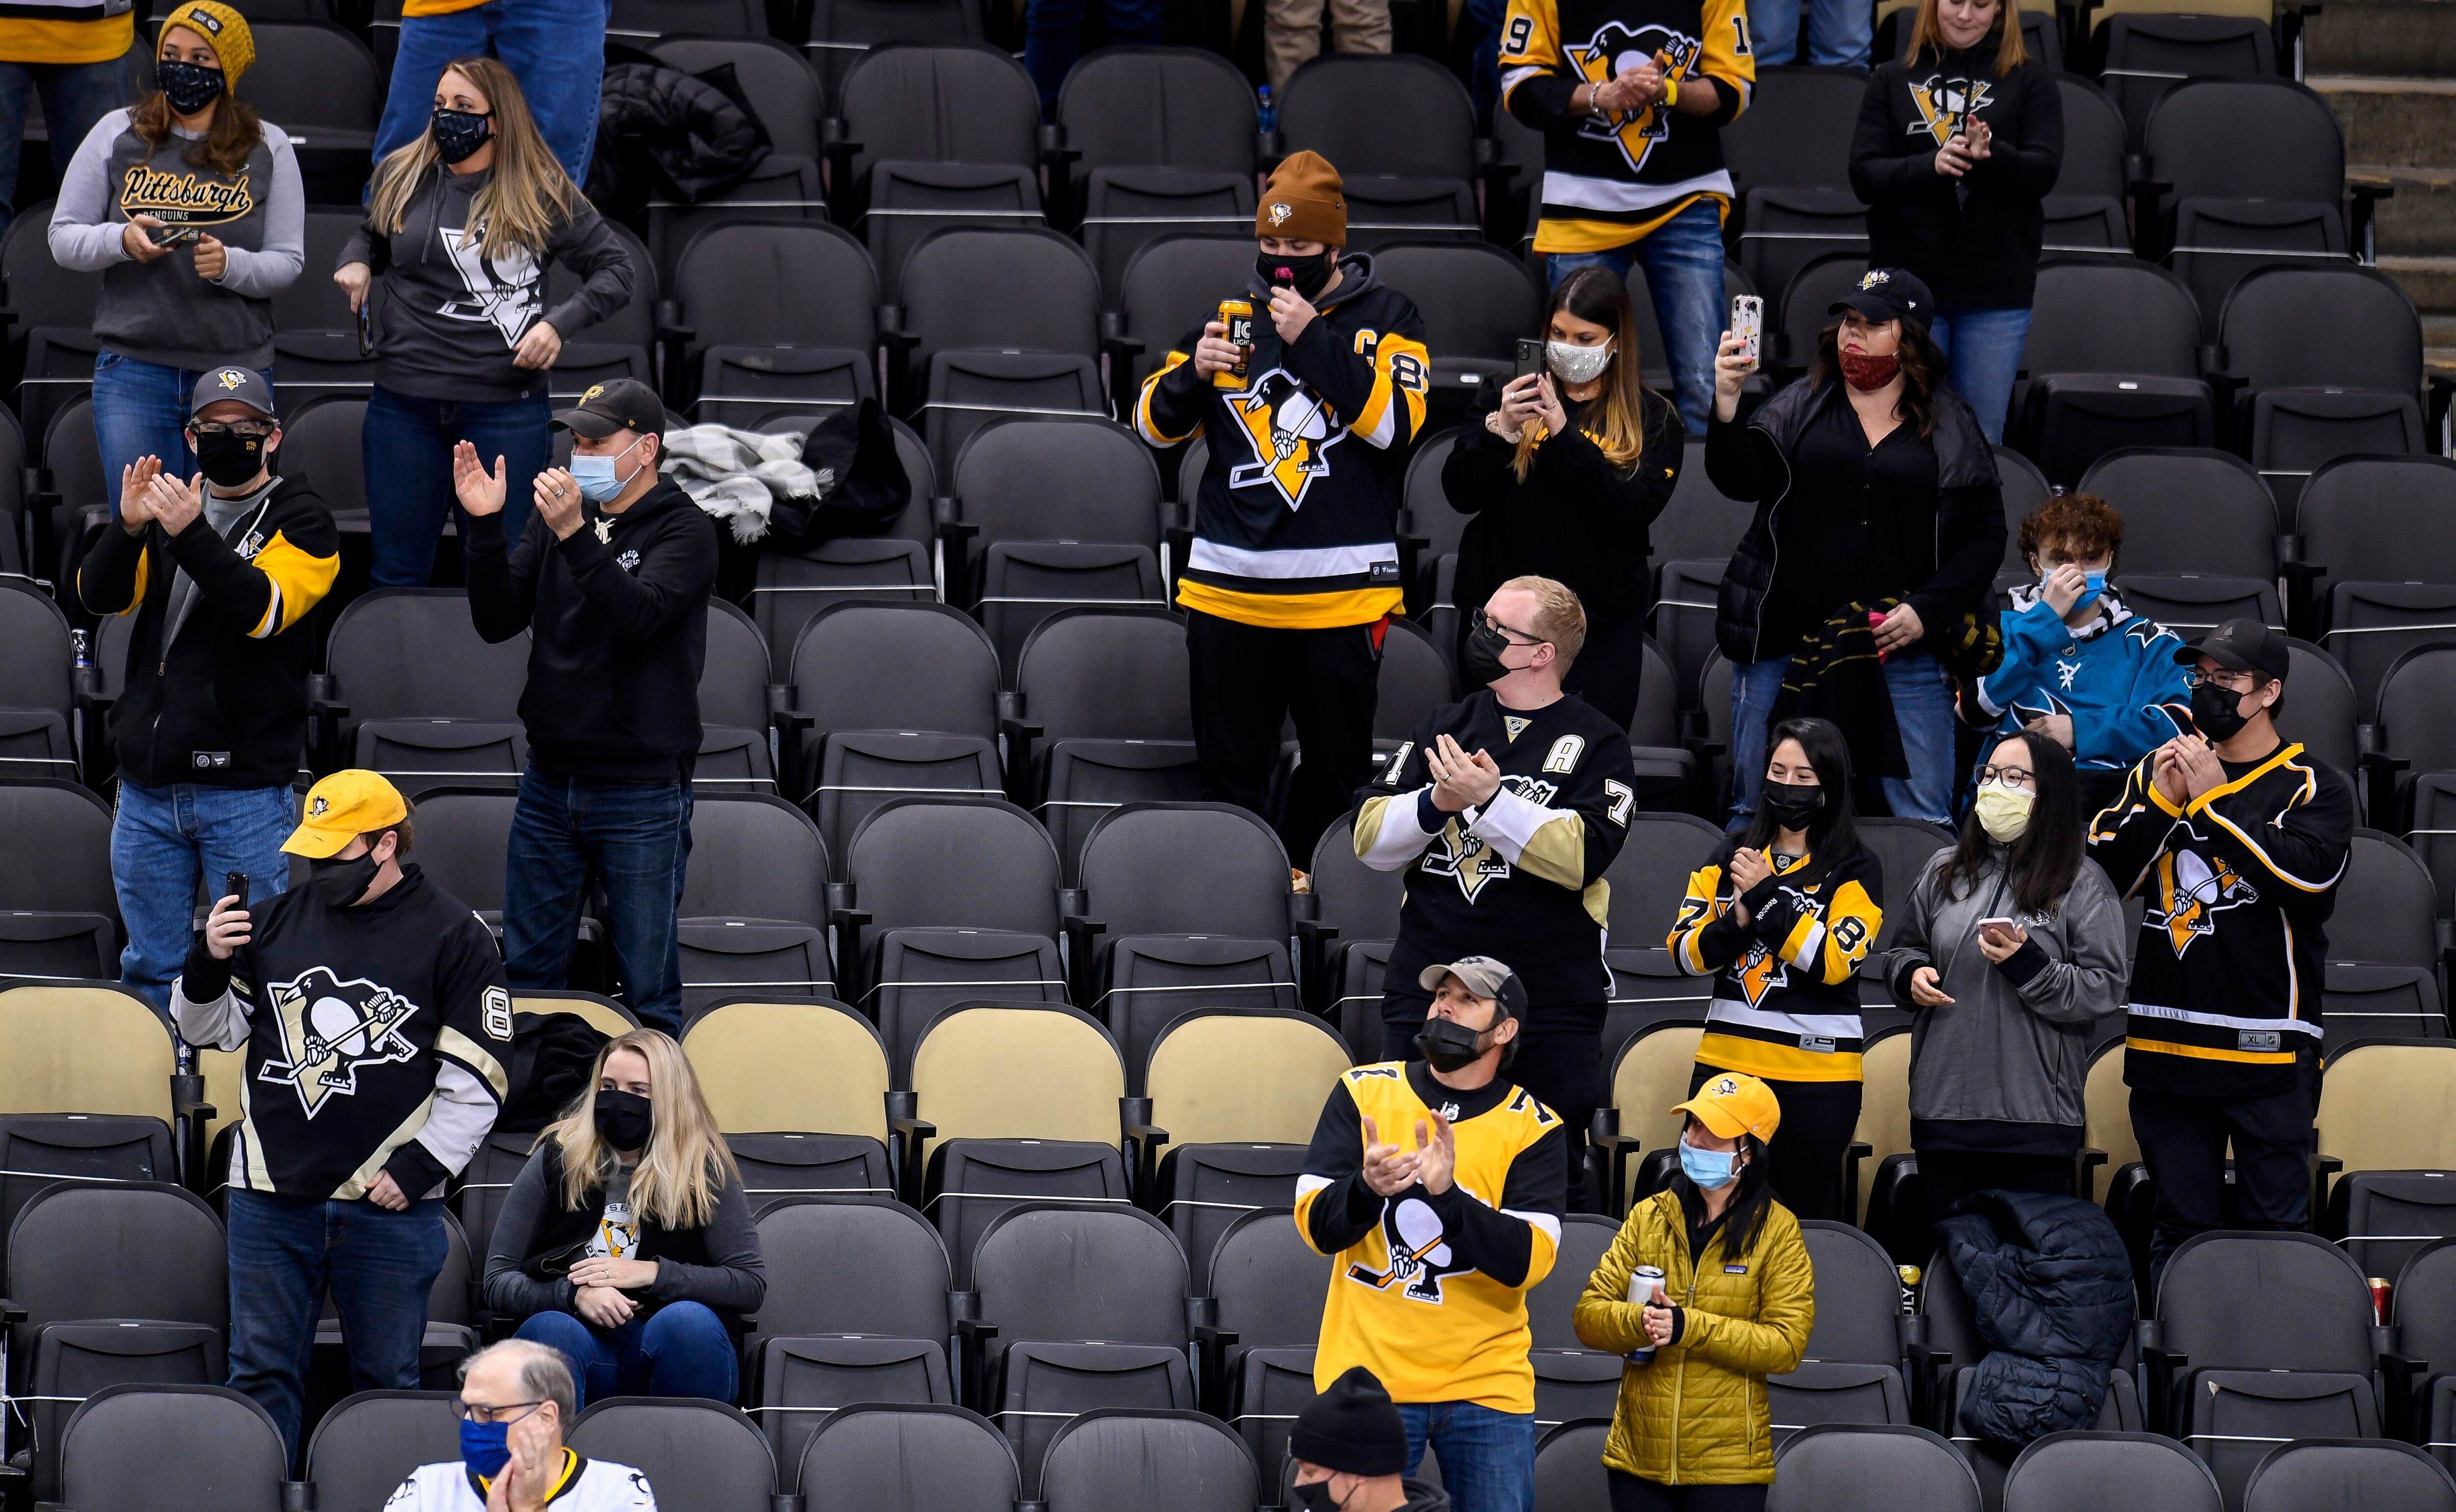 Penguins to welcome limited number of fans back to PPG Paints Arena  following Gov. Wolf's easing of gathering restrictions in Pa. - PensBurgh